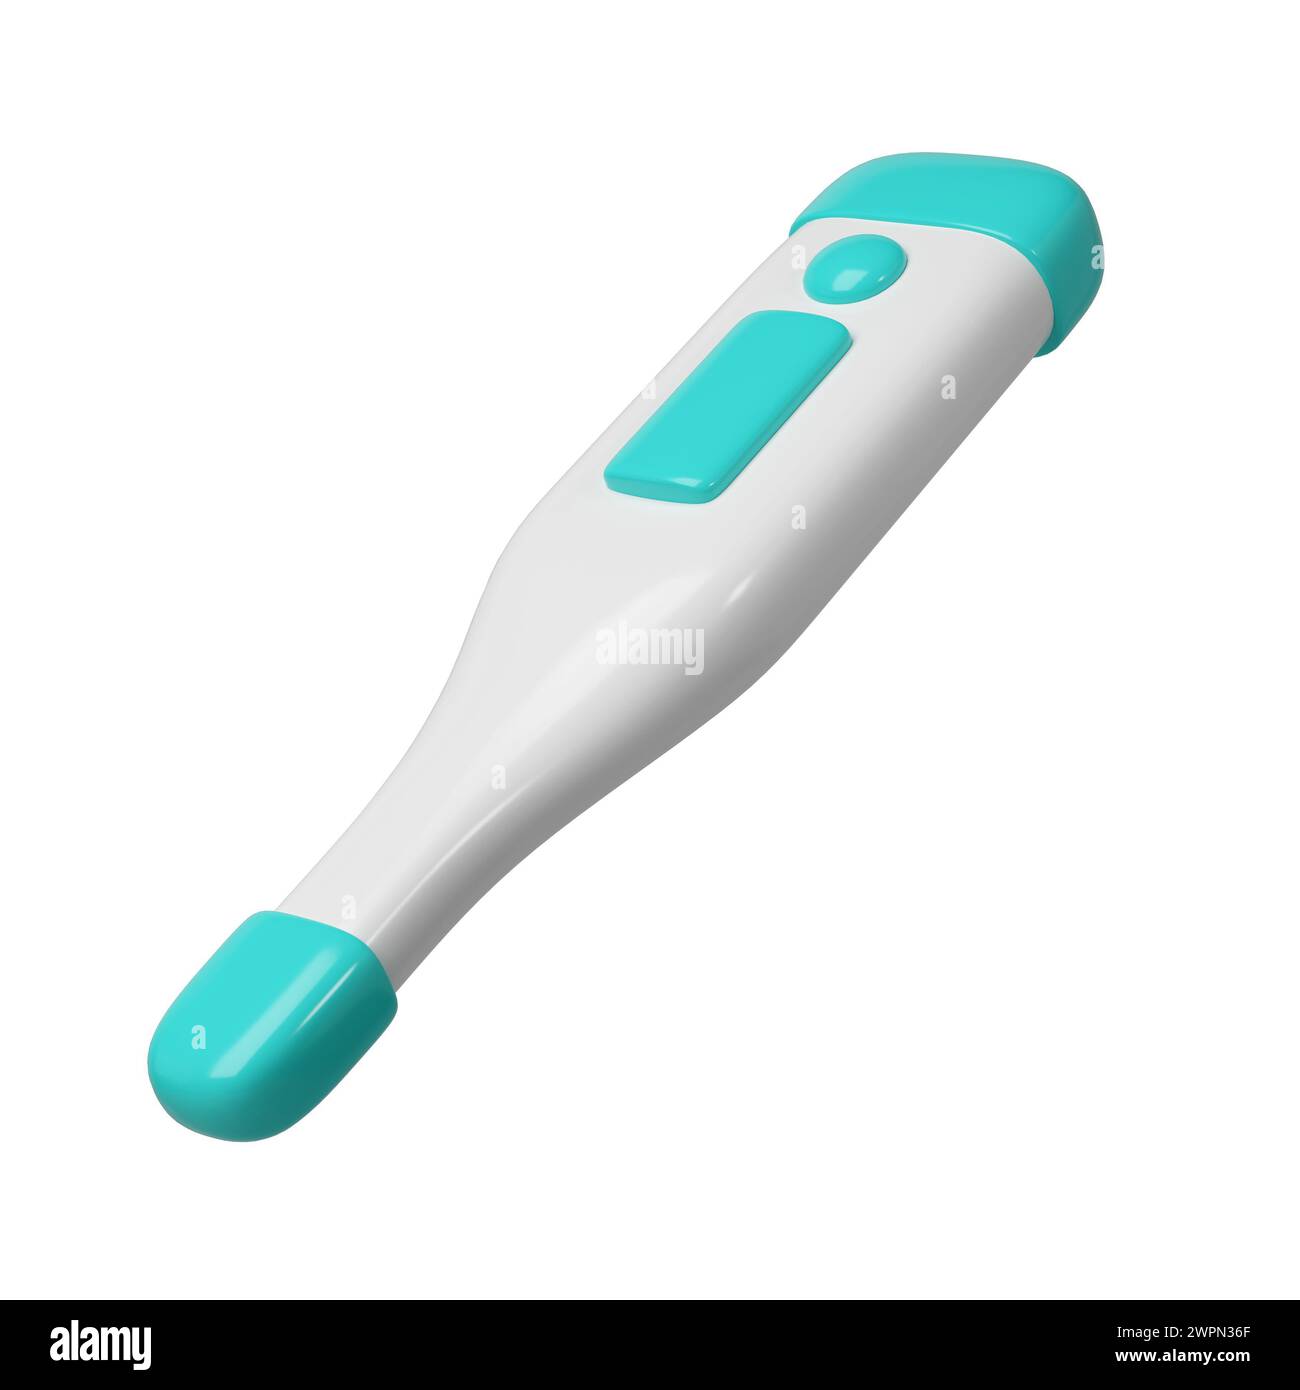 3d medical electronic thermometer. Rendering illustration of medicine diagnostic instrument to temperature measurement in turquoise color. Cute Stock Photo